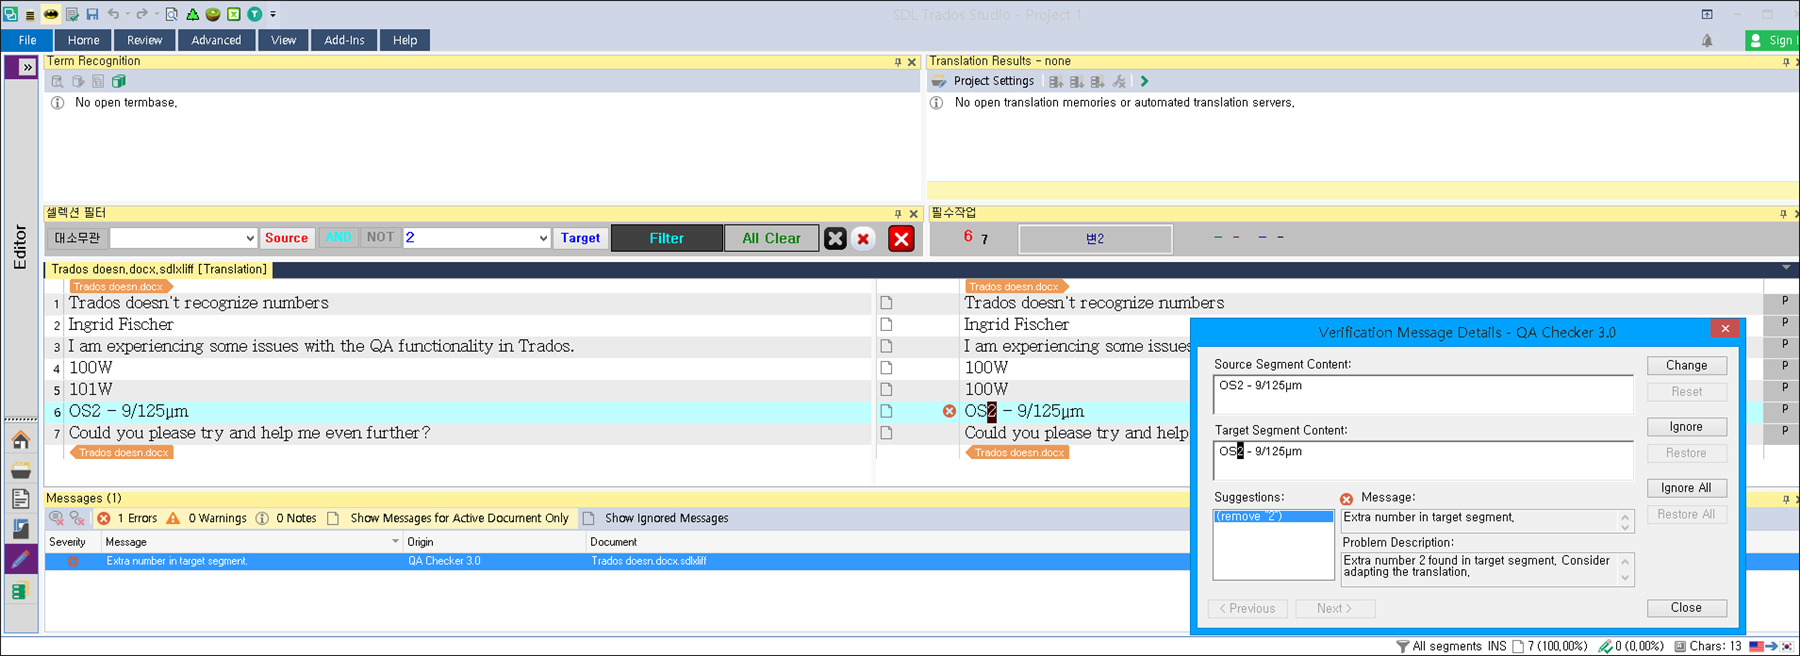 Screenshot of Trados Studio showing an error message 'Extra number in target segment' for segment number 5, highlighted in orange.